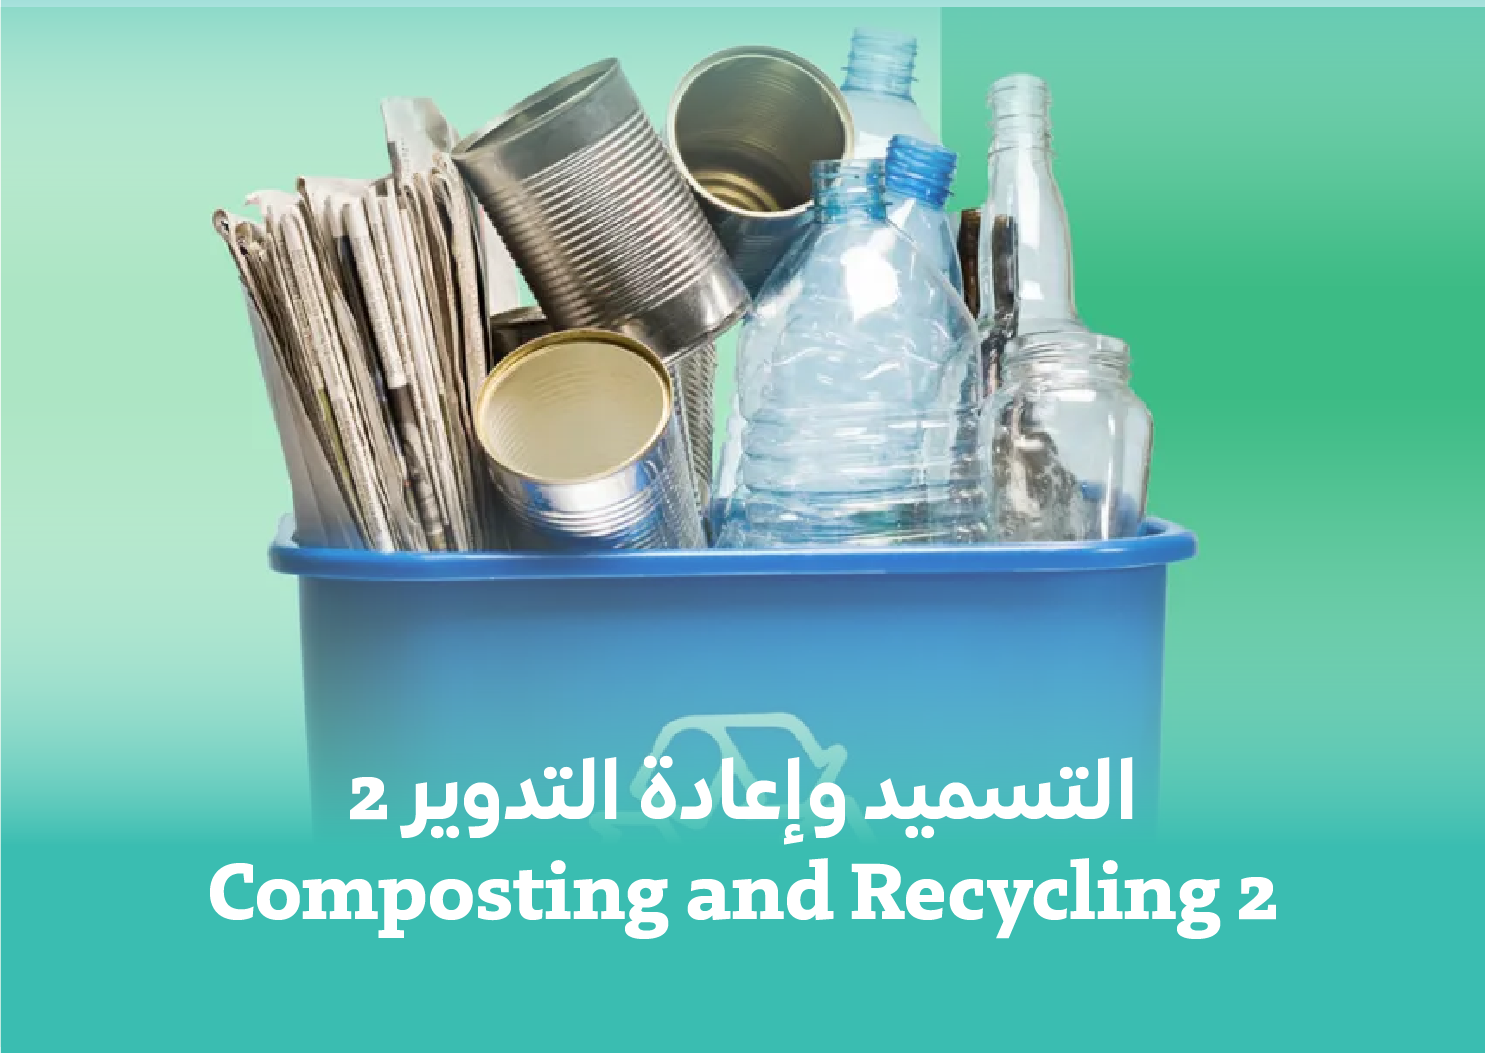 Composting and Recycling 2